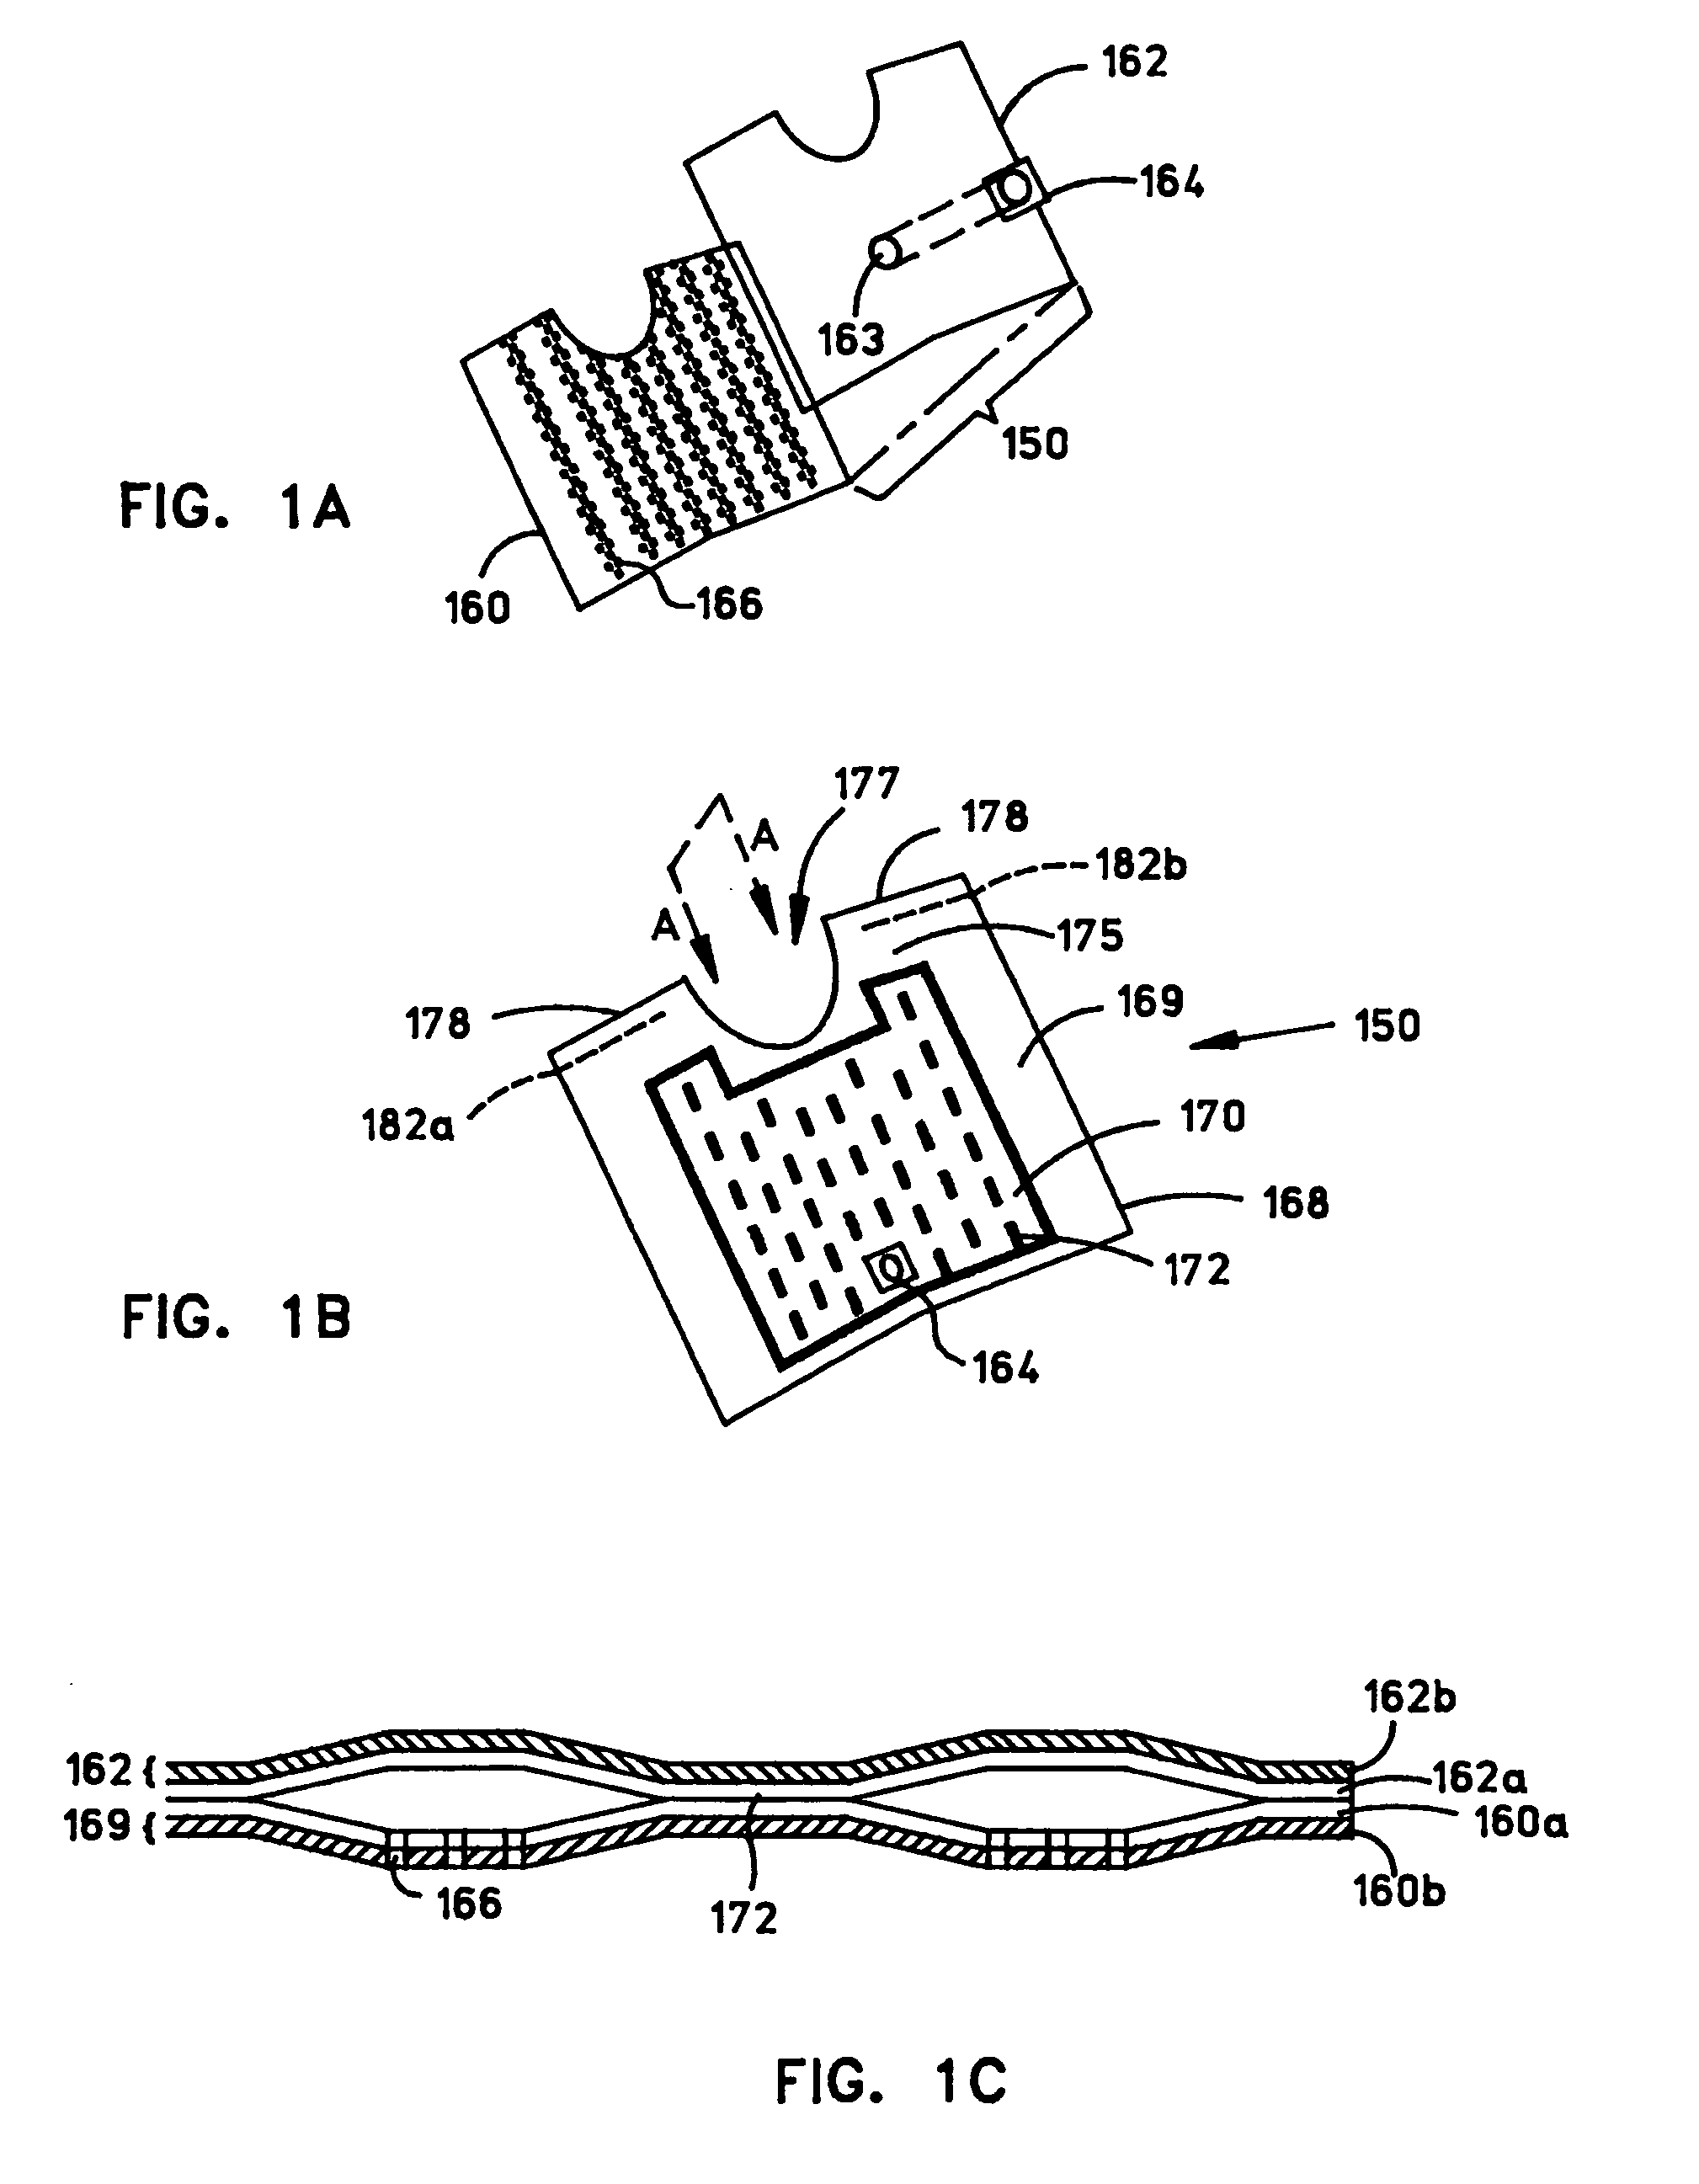 Patient comfort apparatus and system